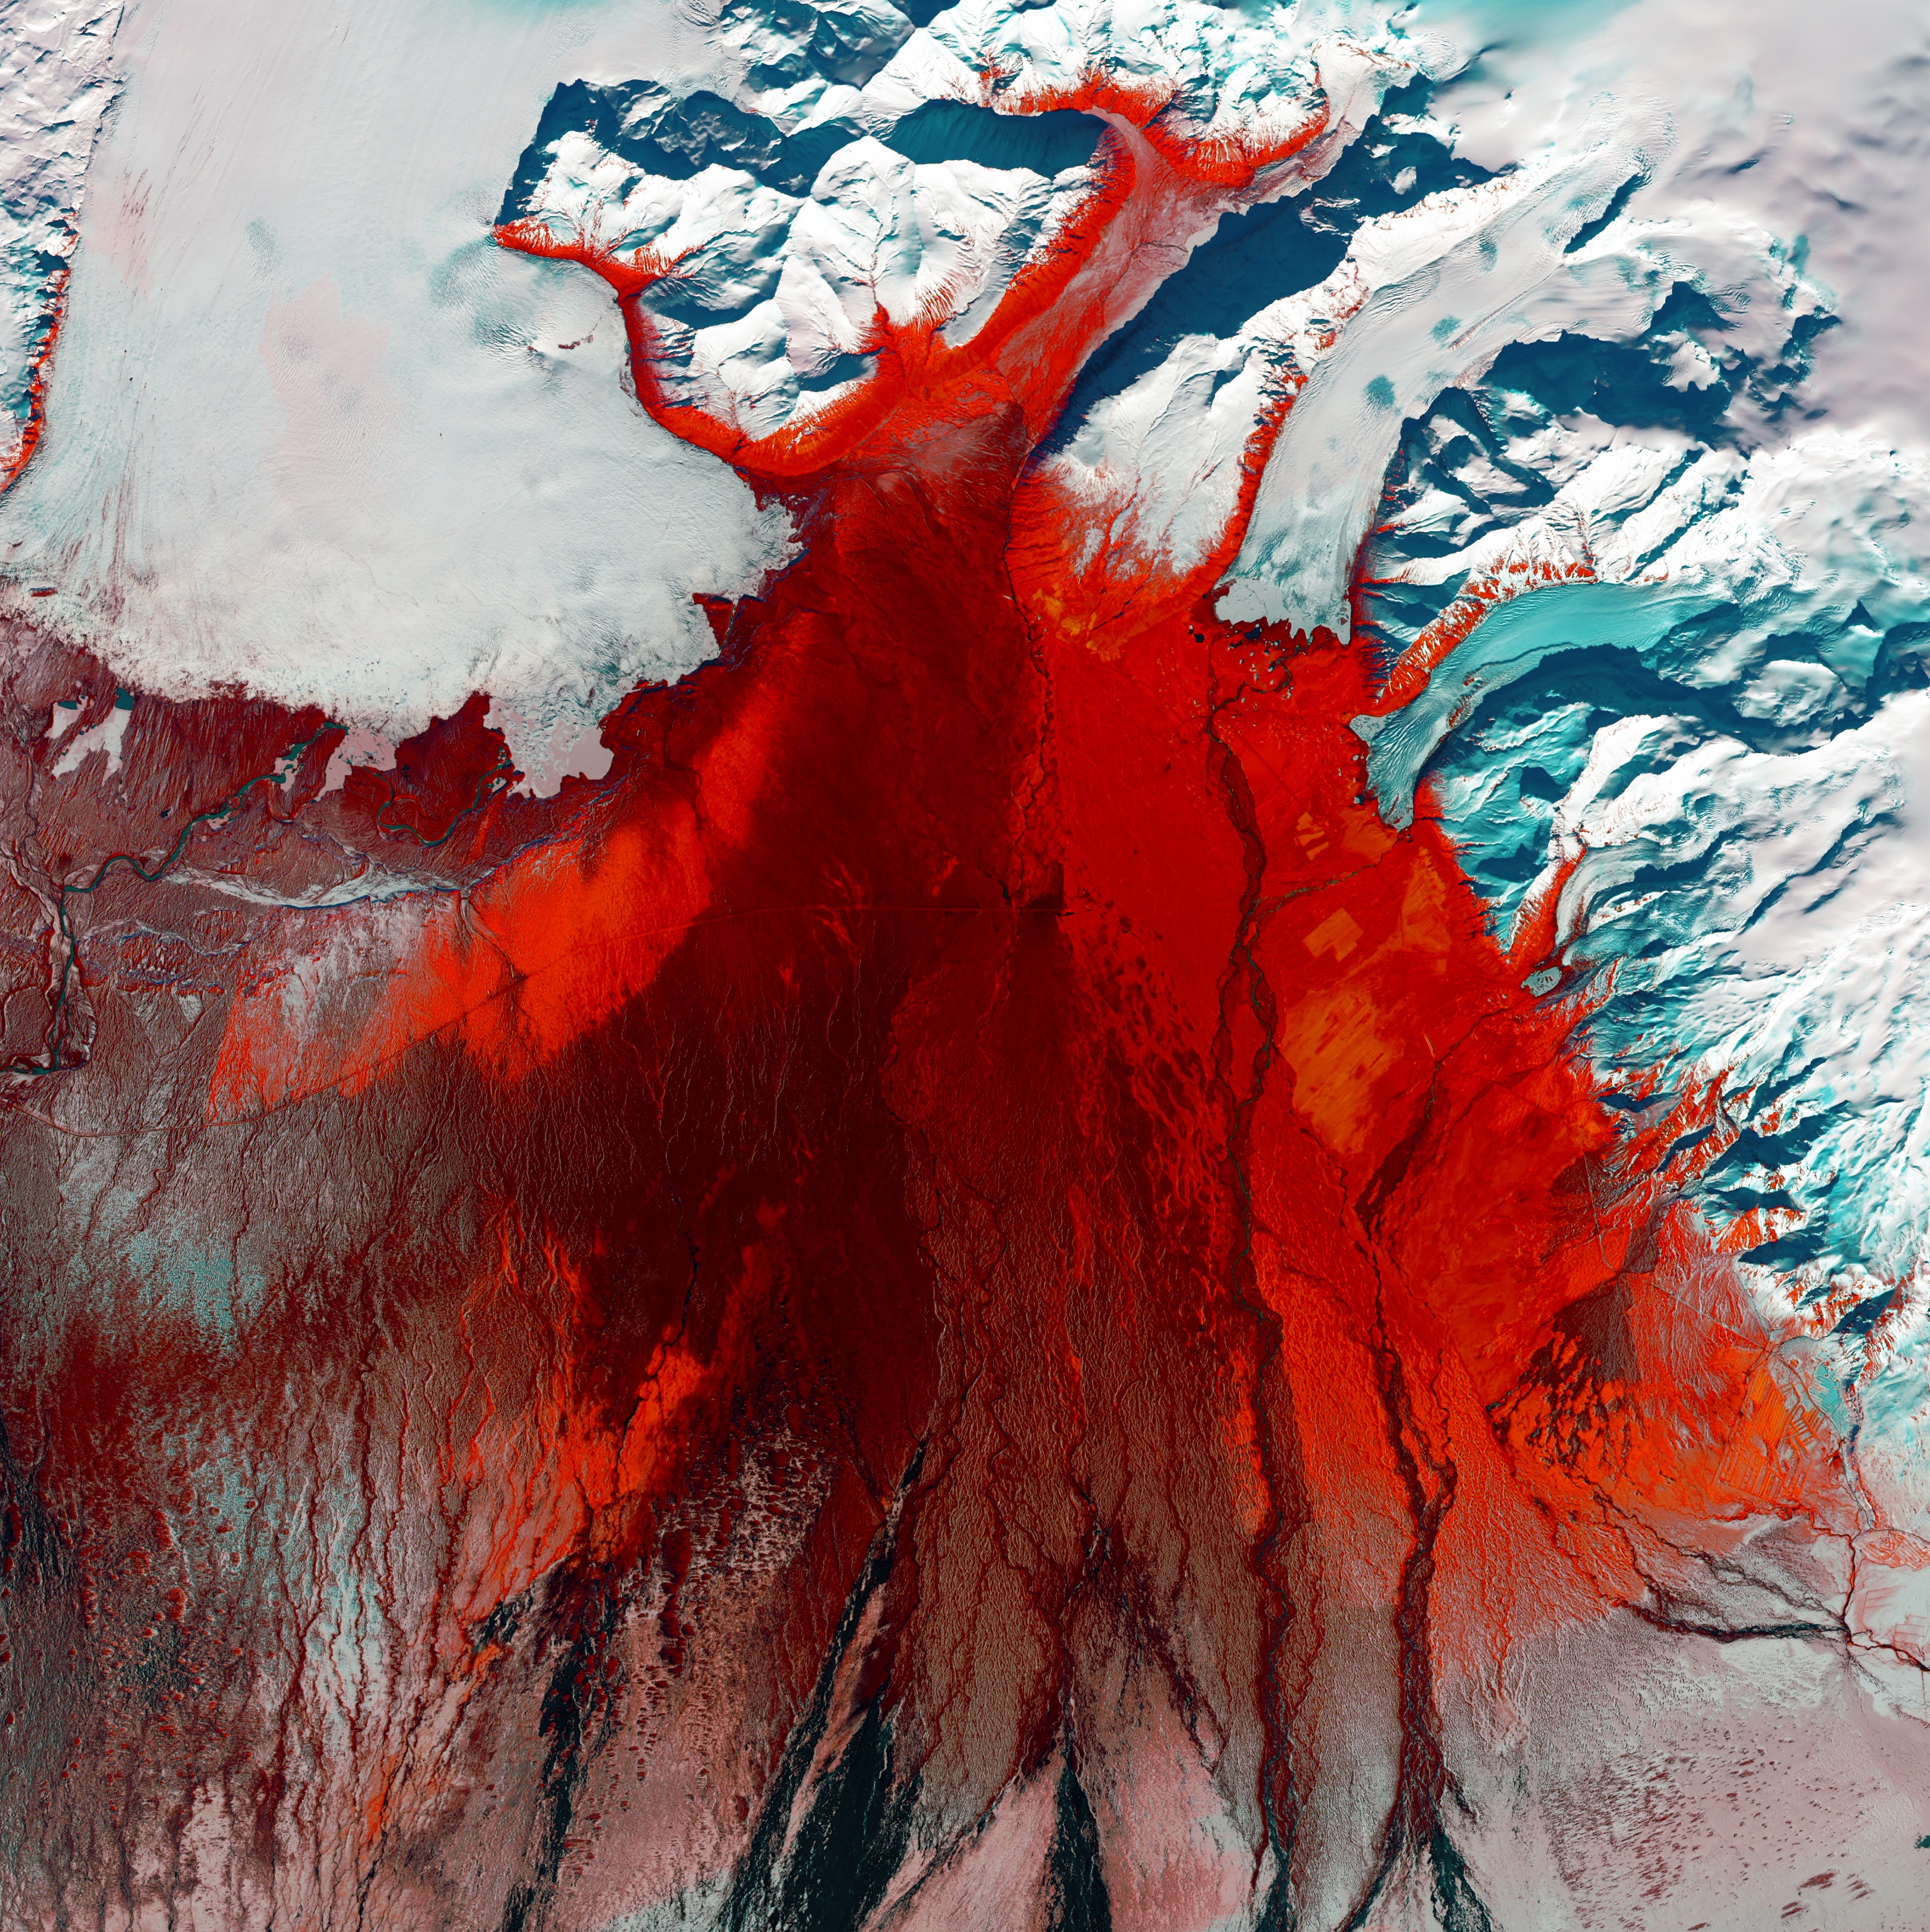 view from above, glacier, nature, ice, red, relief UHD